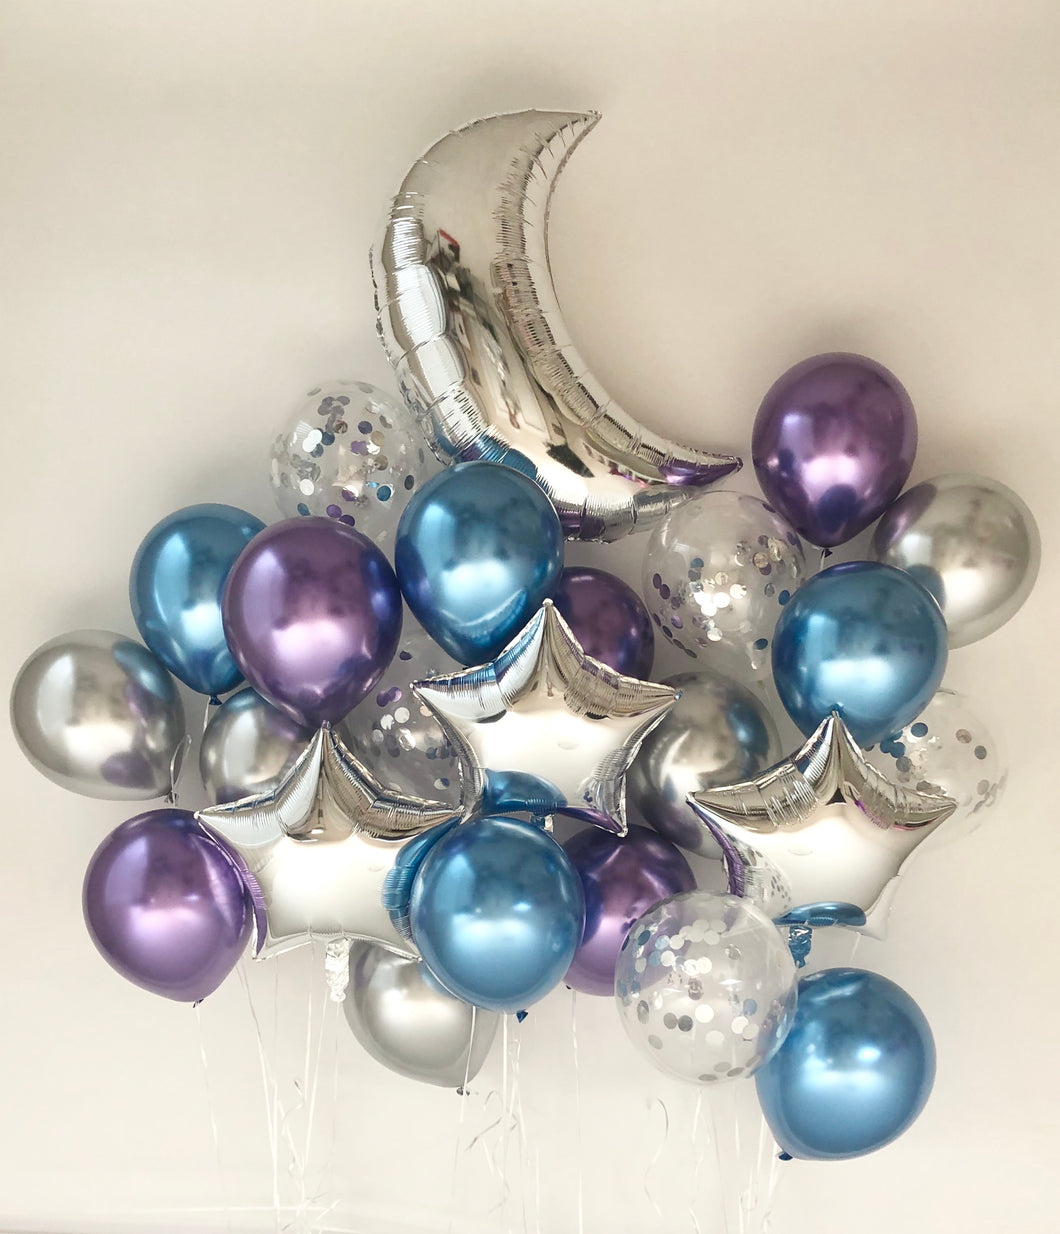 Sweet Moon 24 Piece Moon and Star Balloons Bouquet - Baby Shower, Birthday, Gender Reveal, Eid, and Ramadan Party Decoration (Blue & Purple)